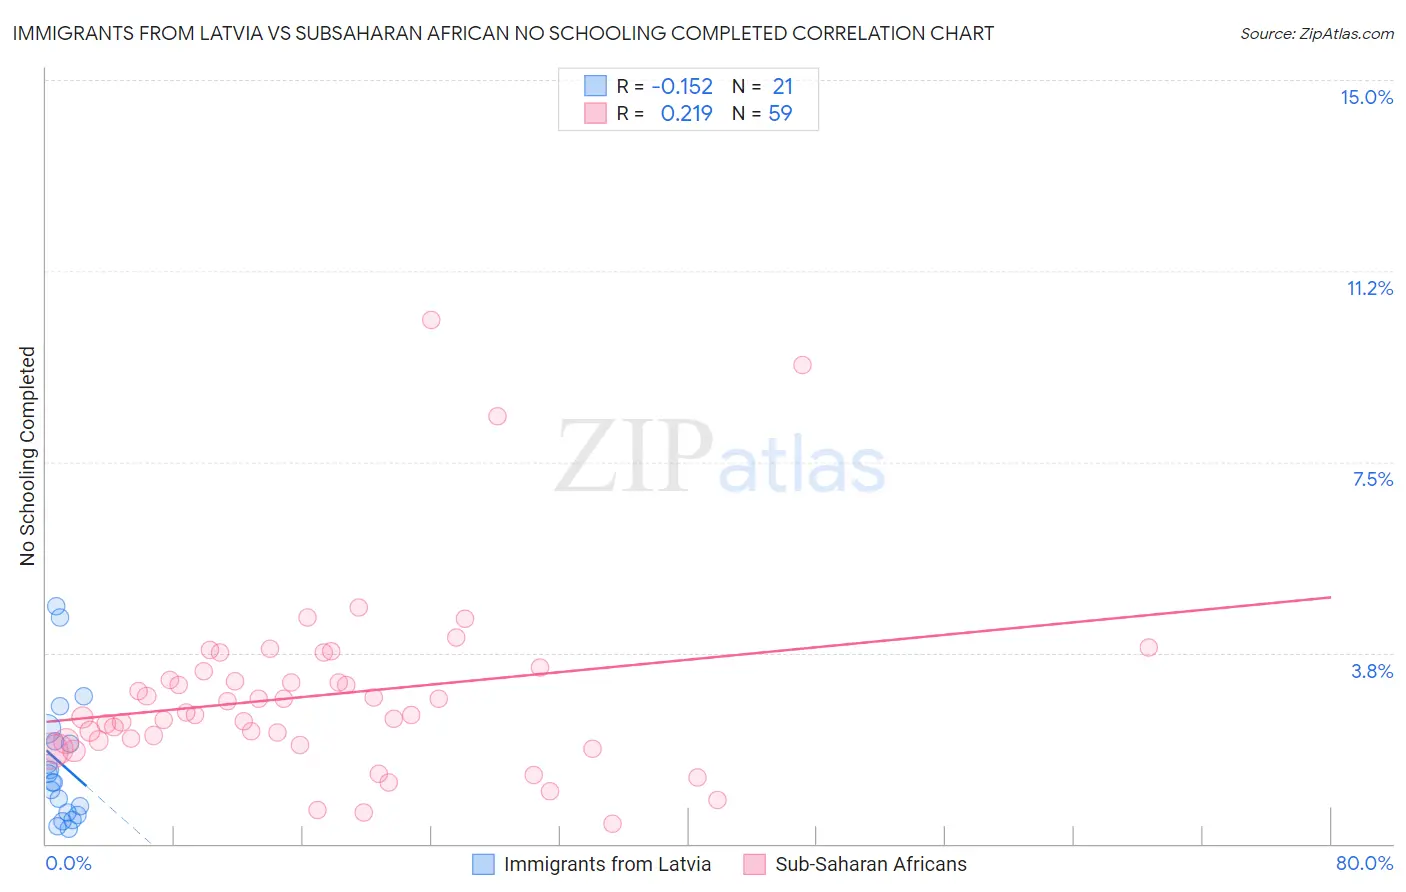 Immigrants from Latvia vs Subsaharan African No Schooling Completed